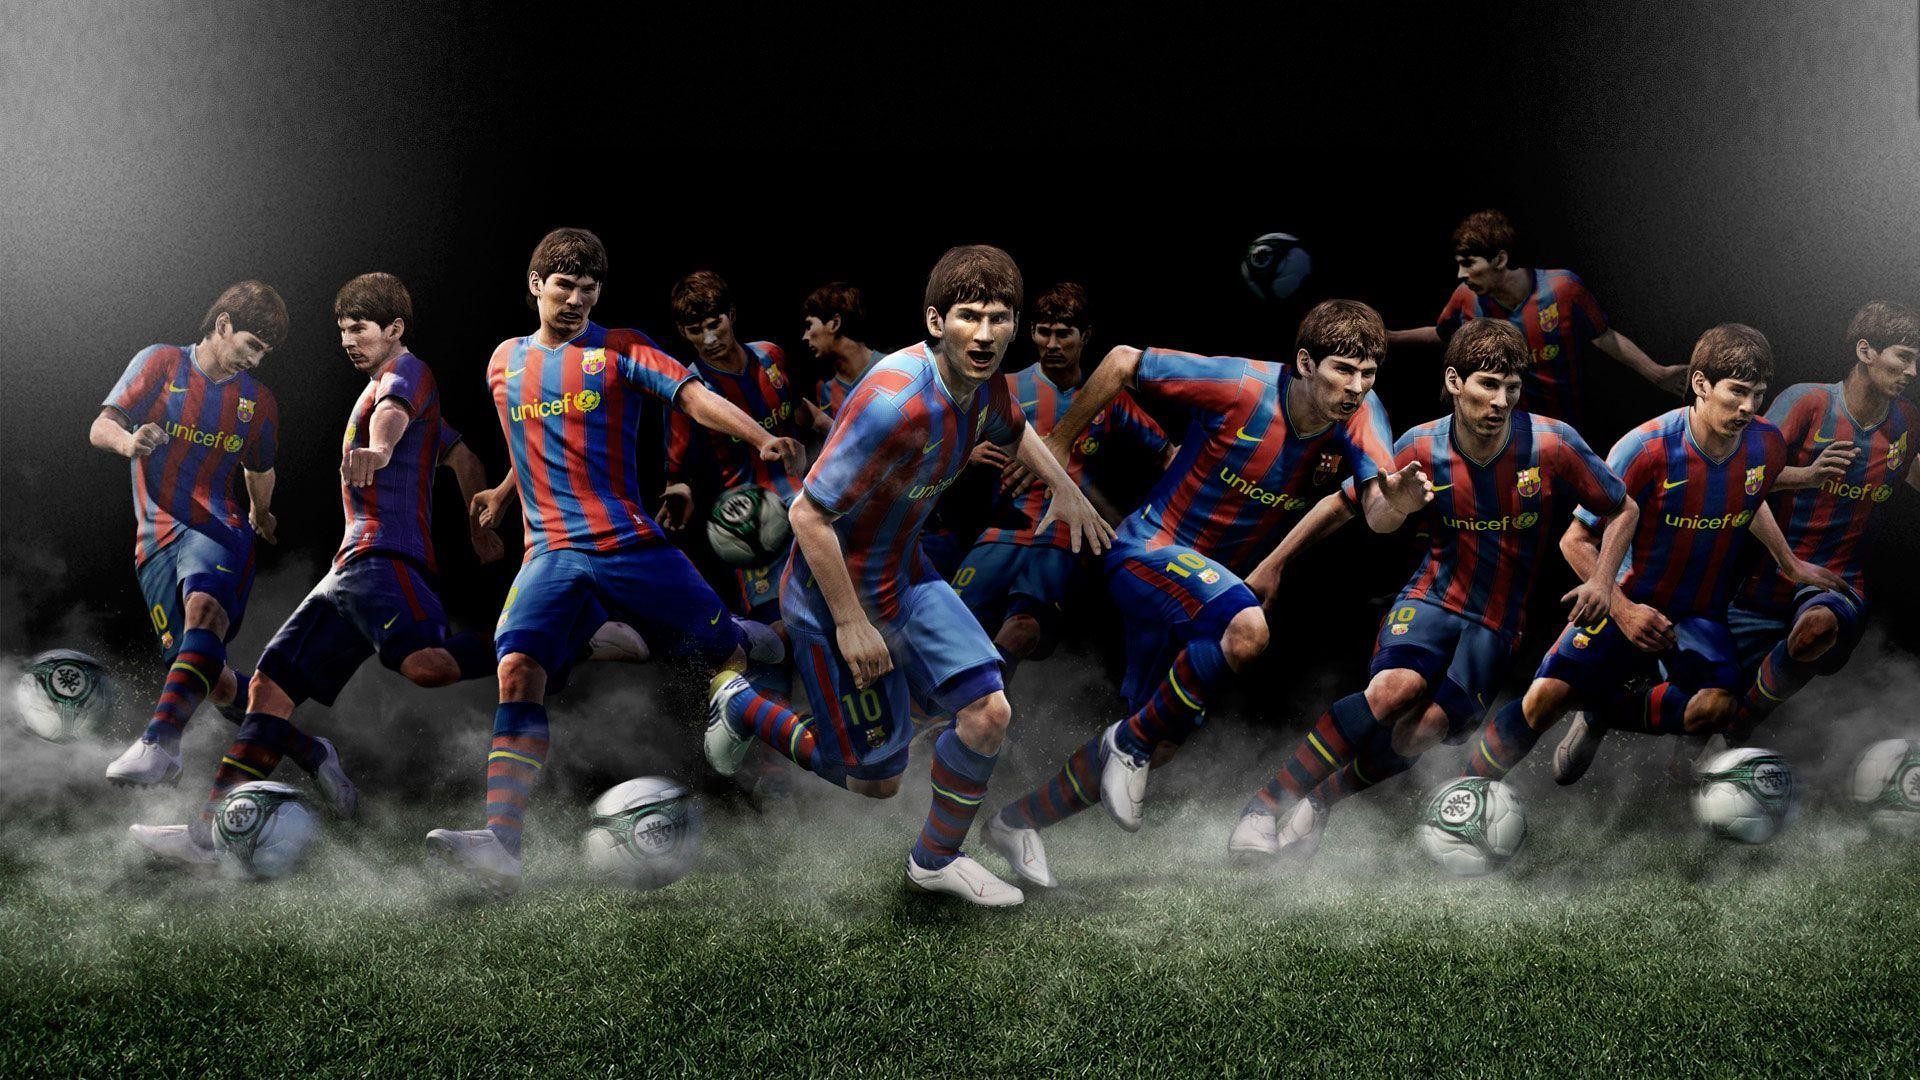 1920x1080 PES 2011 Wallpapers in HD